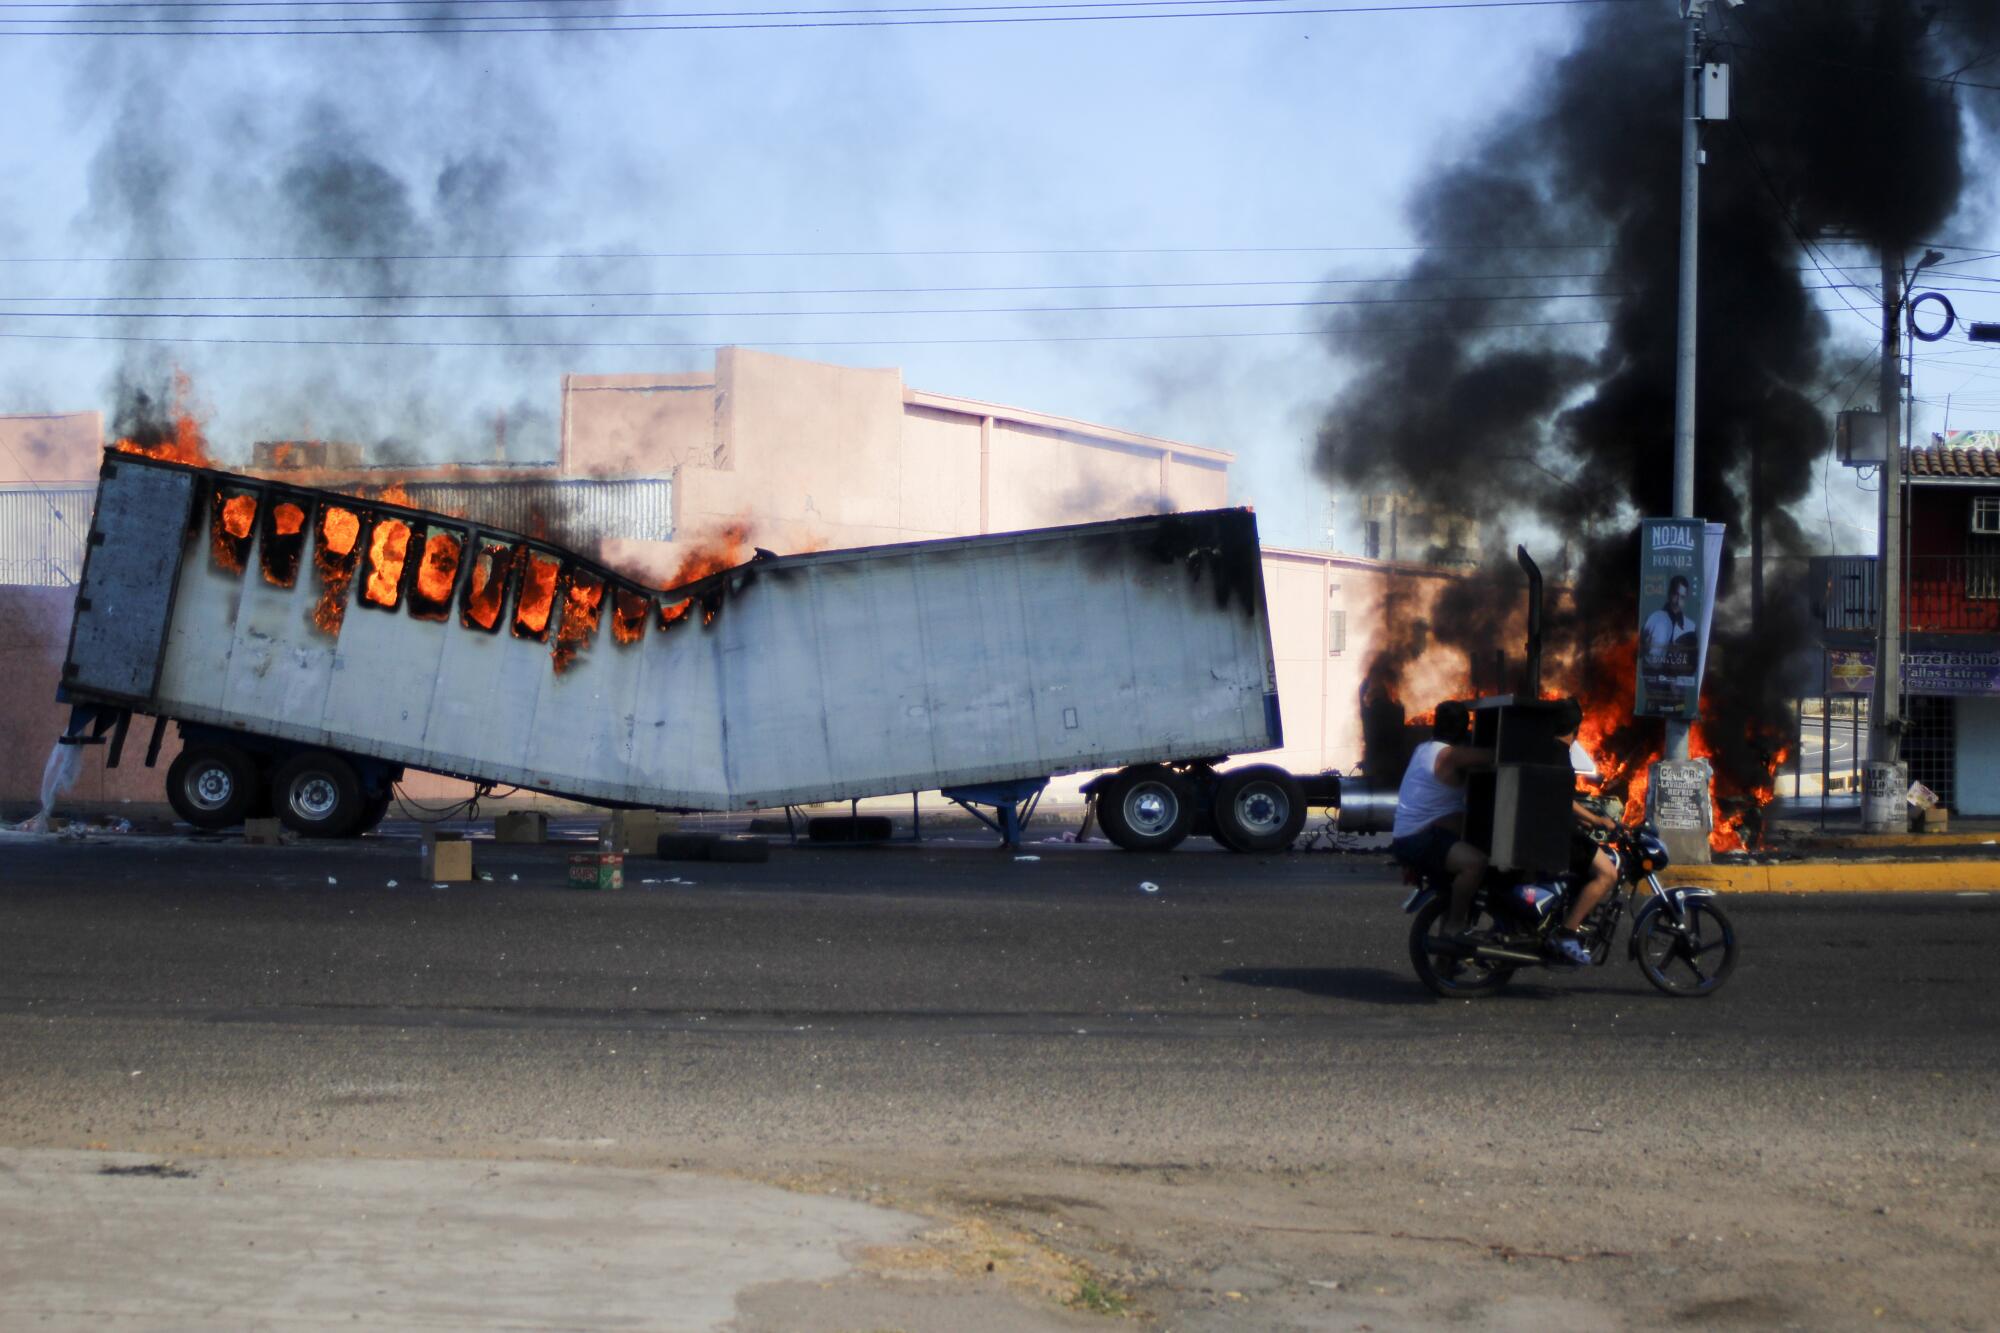 Men ride on a motorcycle past a burning truck on the streets of Culiacán, Sinaloa